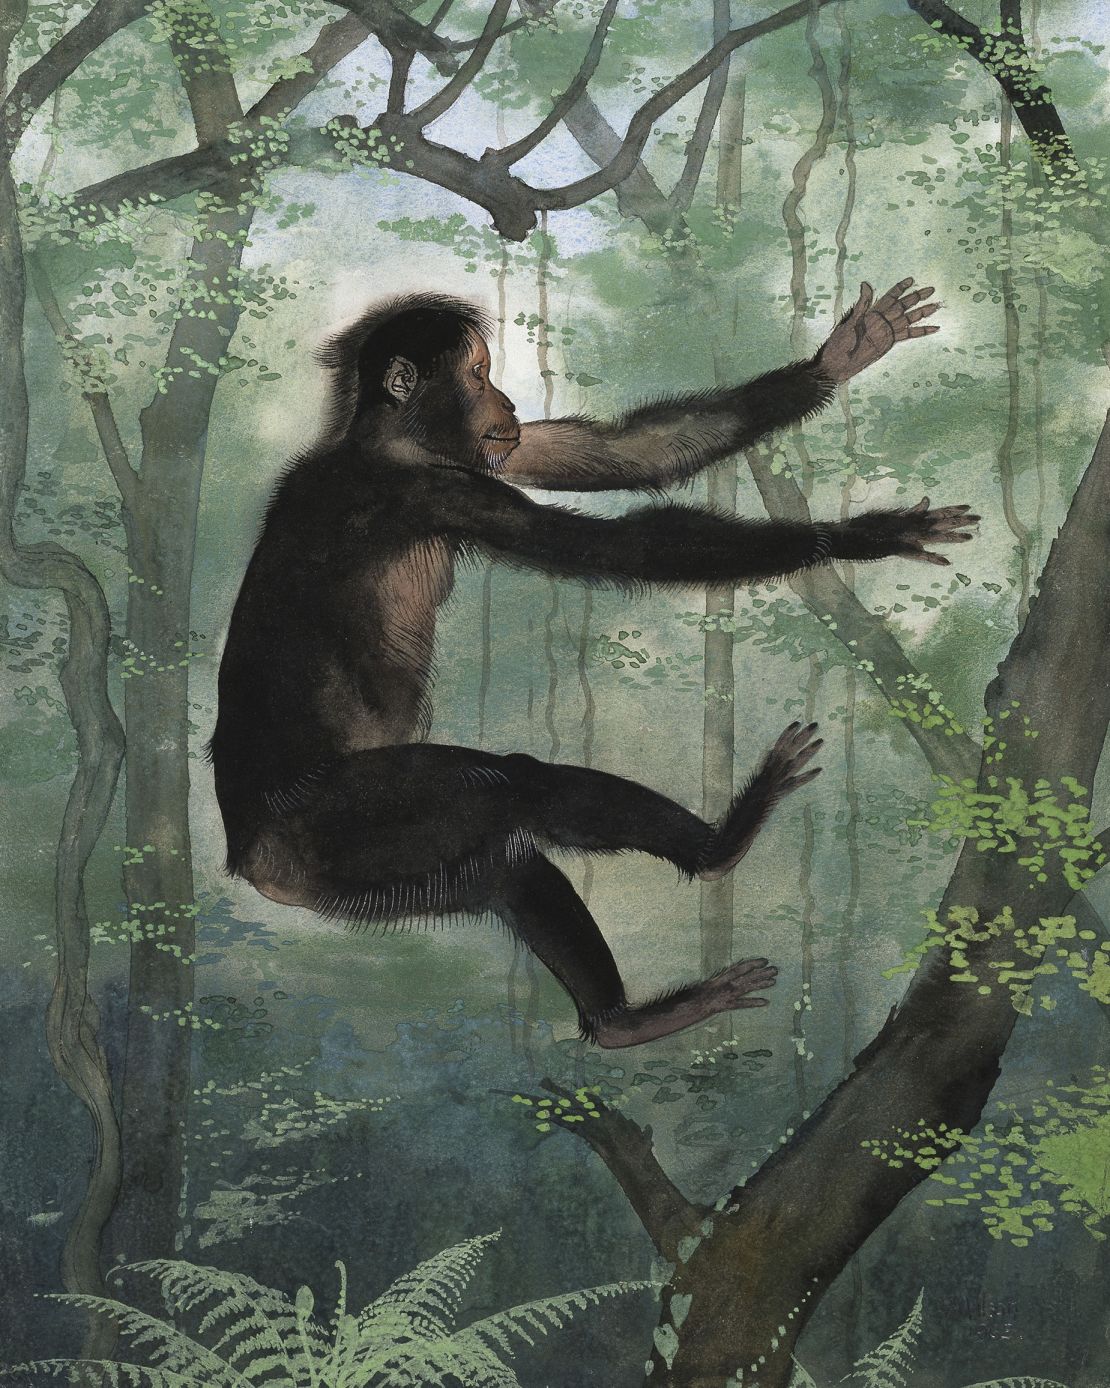 Fossils show that the ancient primate Proconsul africanus, shown in the illustration above, was a tailless tree-dweller.